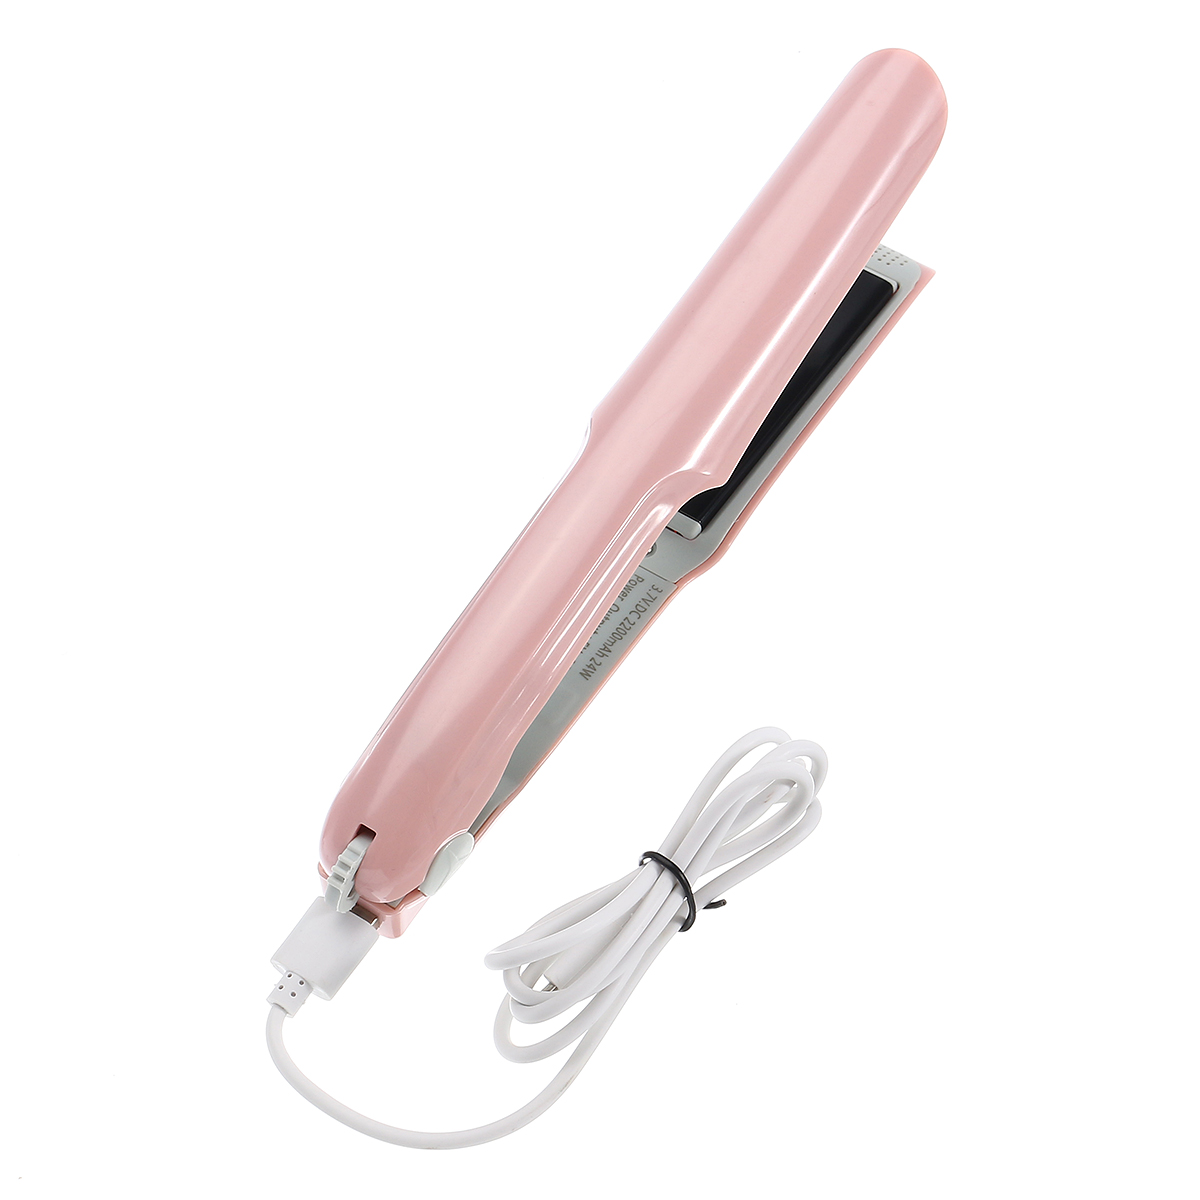 VOGOU 2in1 3D Hair Straightener Curlers Styling Temperature Anion Control Flat Iron Digital